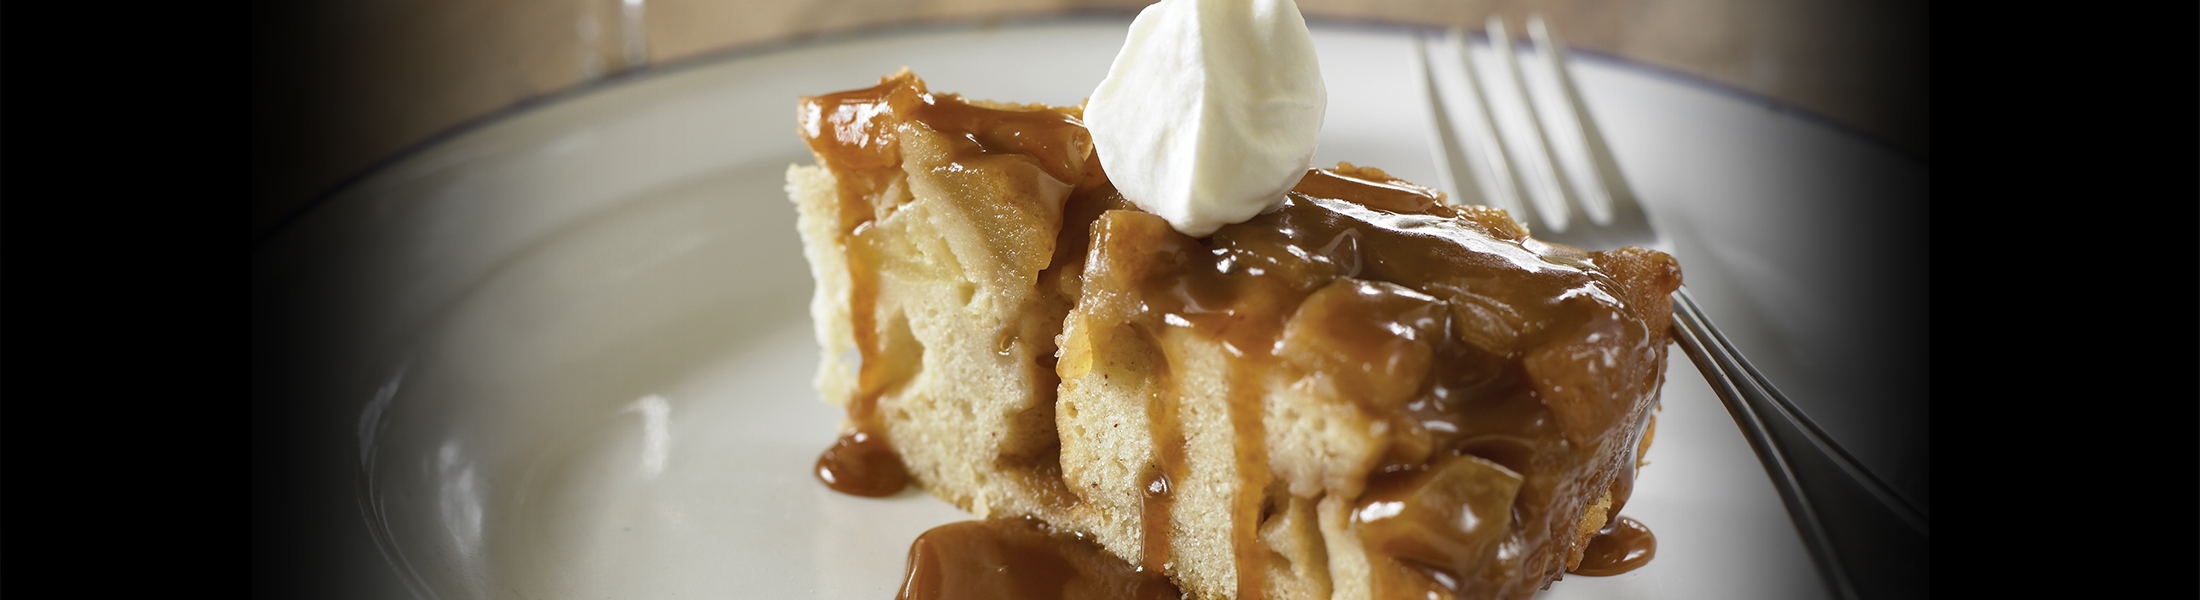 Rodney Strong - Apple Upside-Down Cake with Caramel